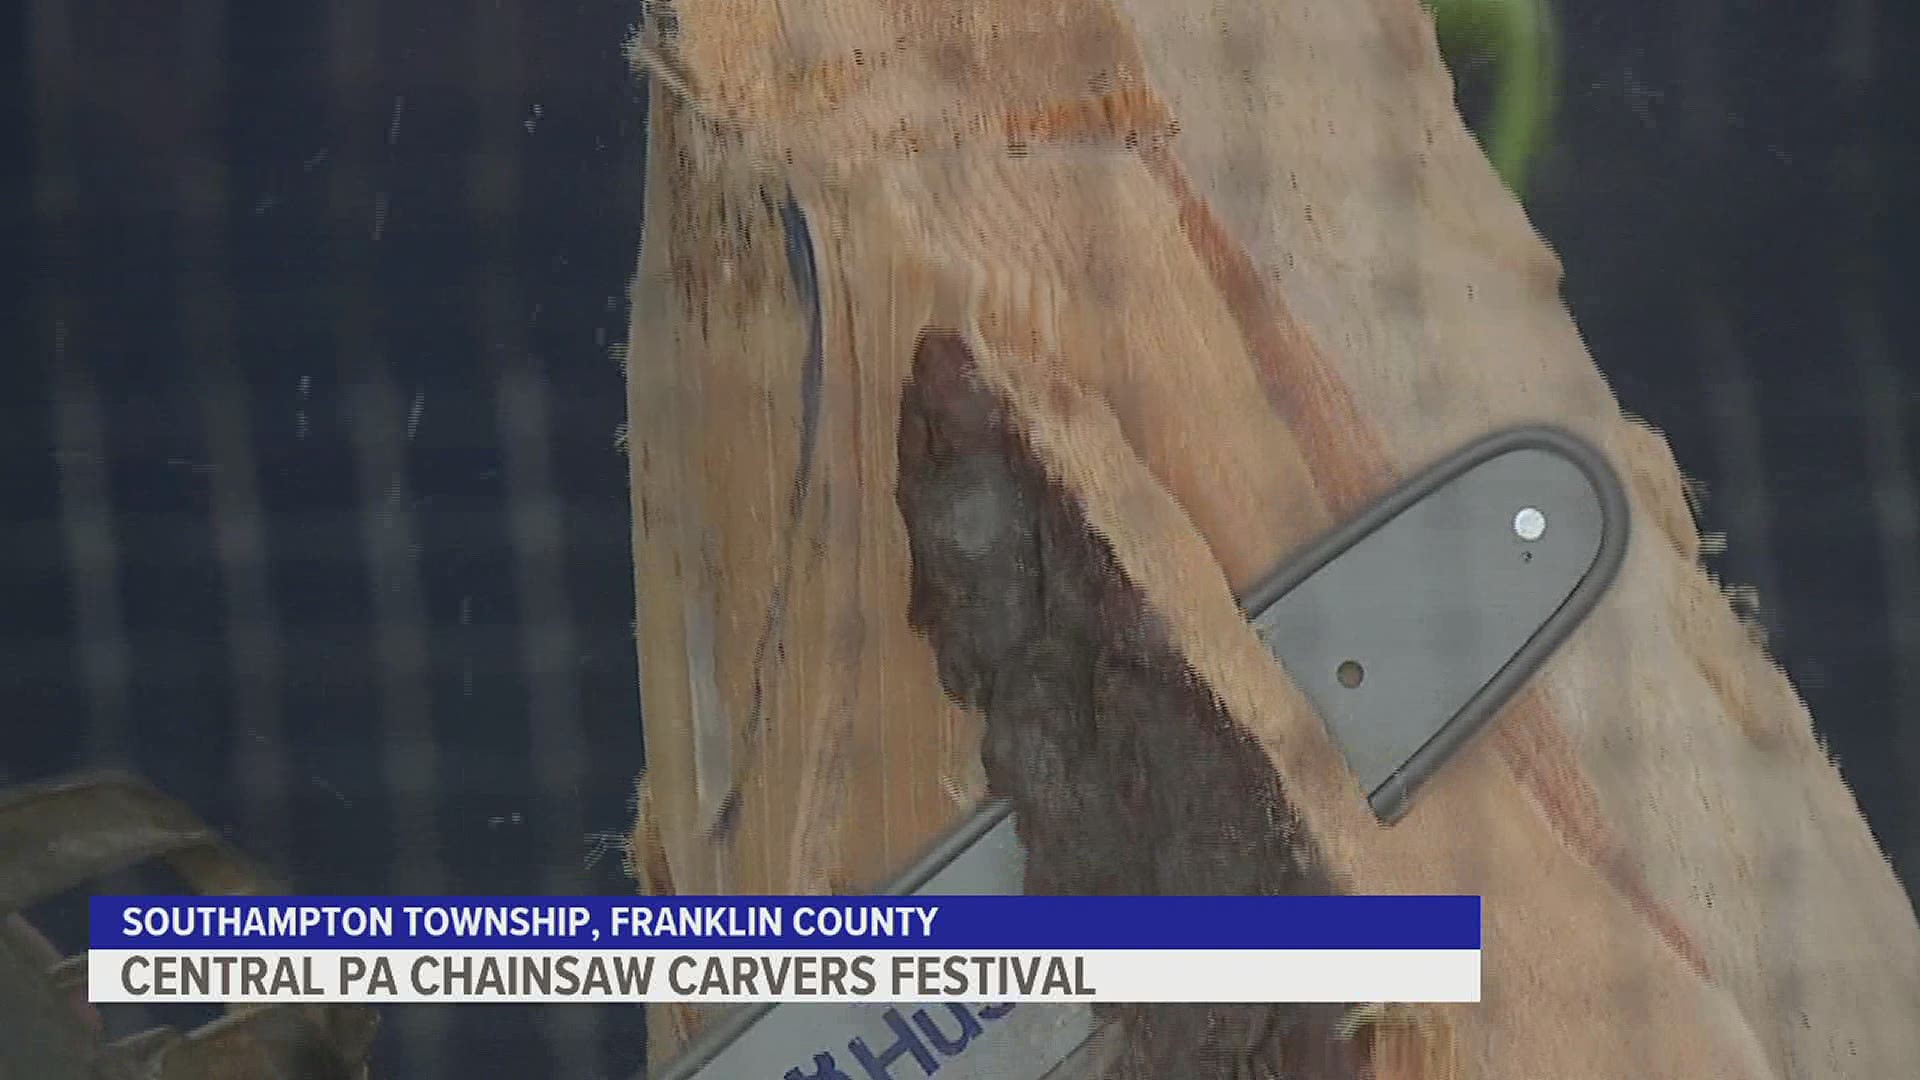 This festival will feature more than 60 chainsaw carvers, including many of the top chainsaw carvers in the world.